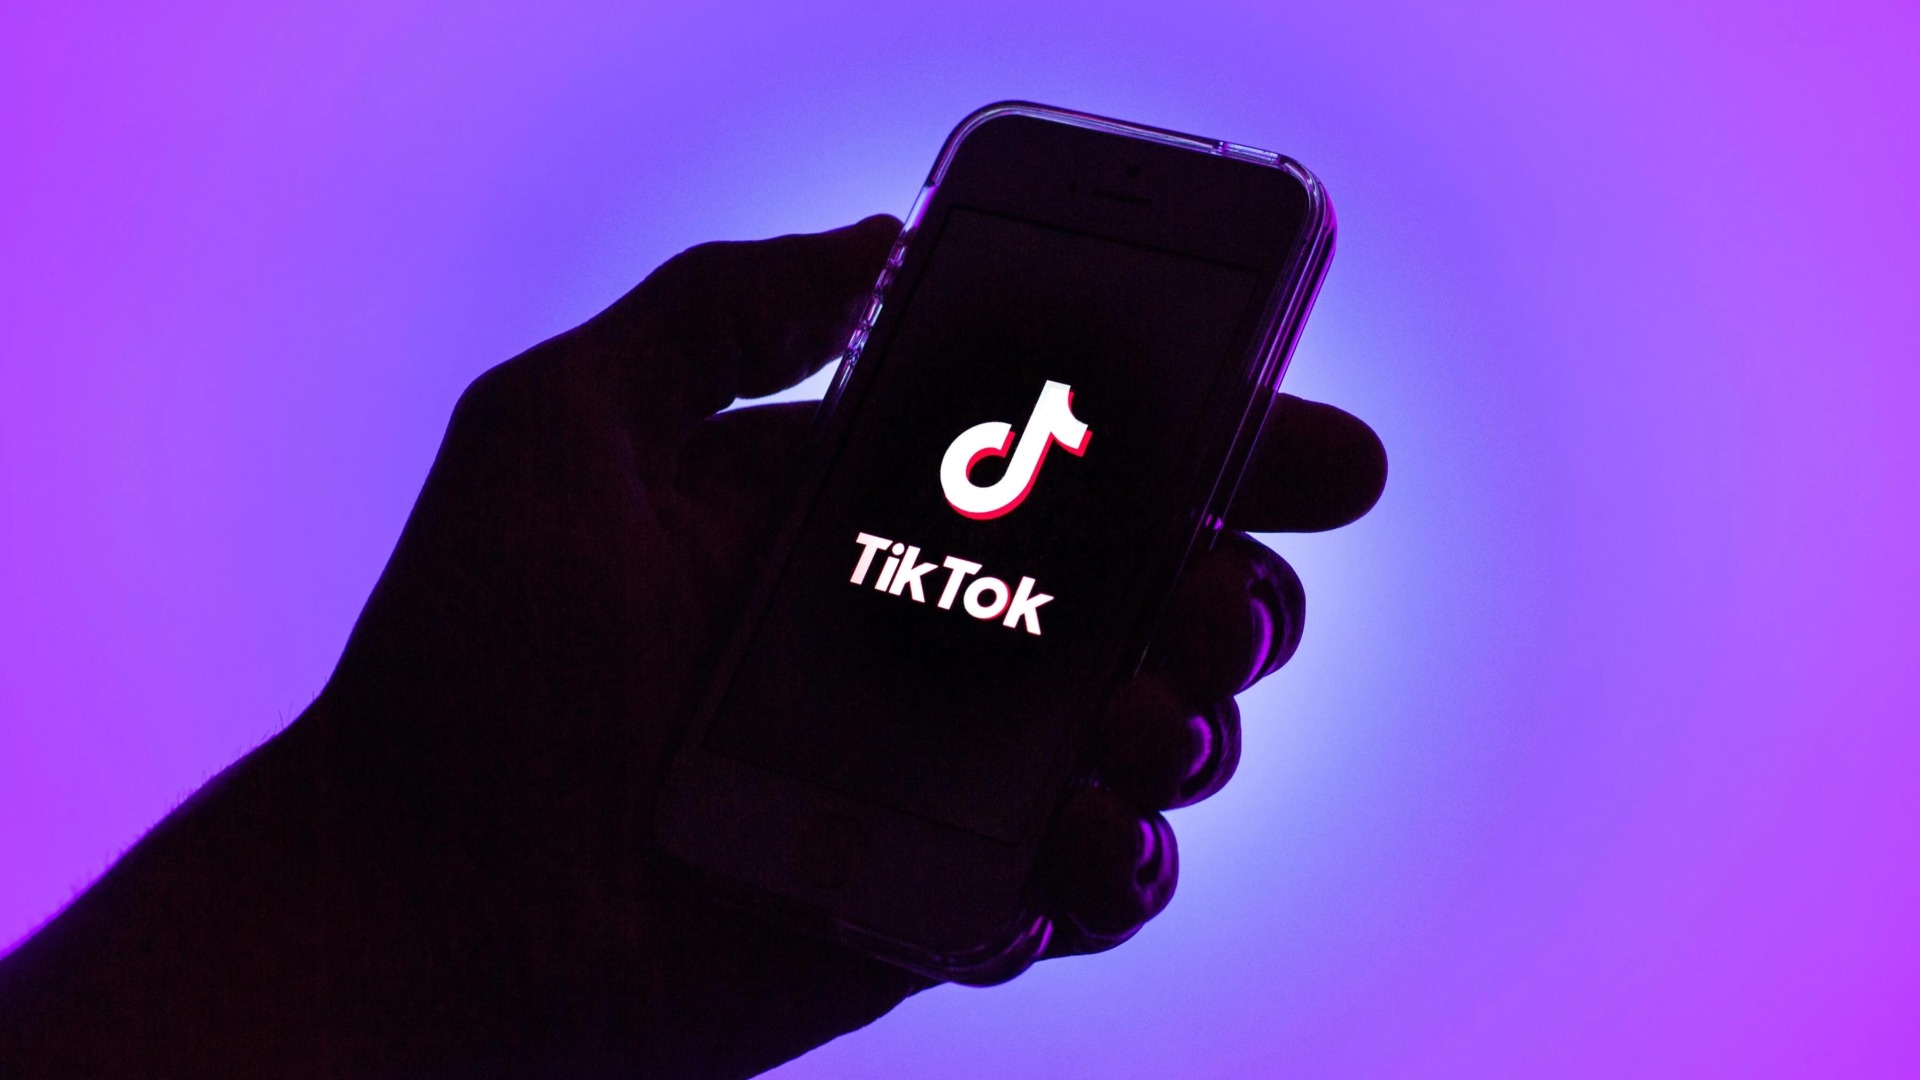 TikTok's Commitment to Data Security: European Data Center and Independent Audits